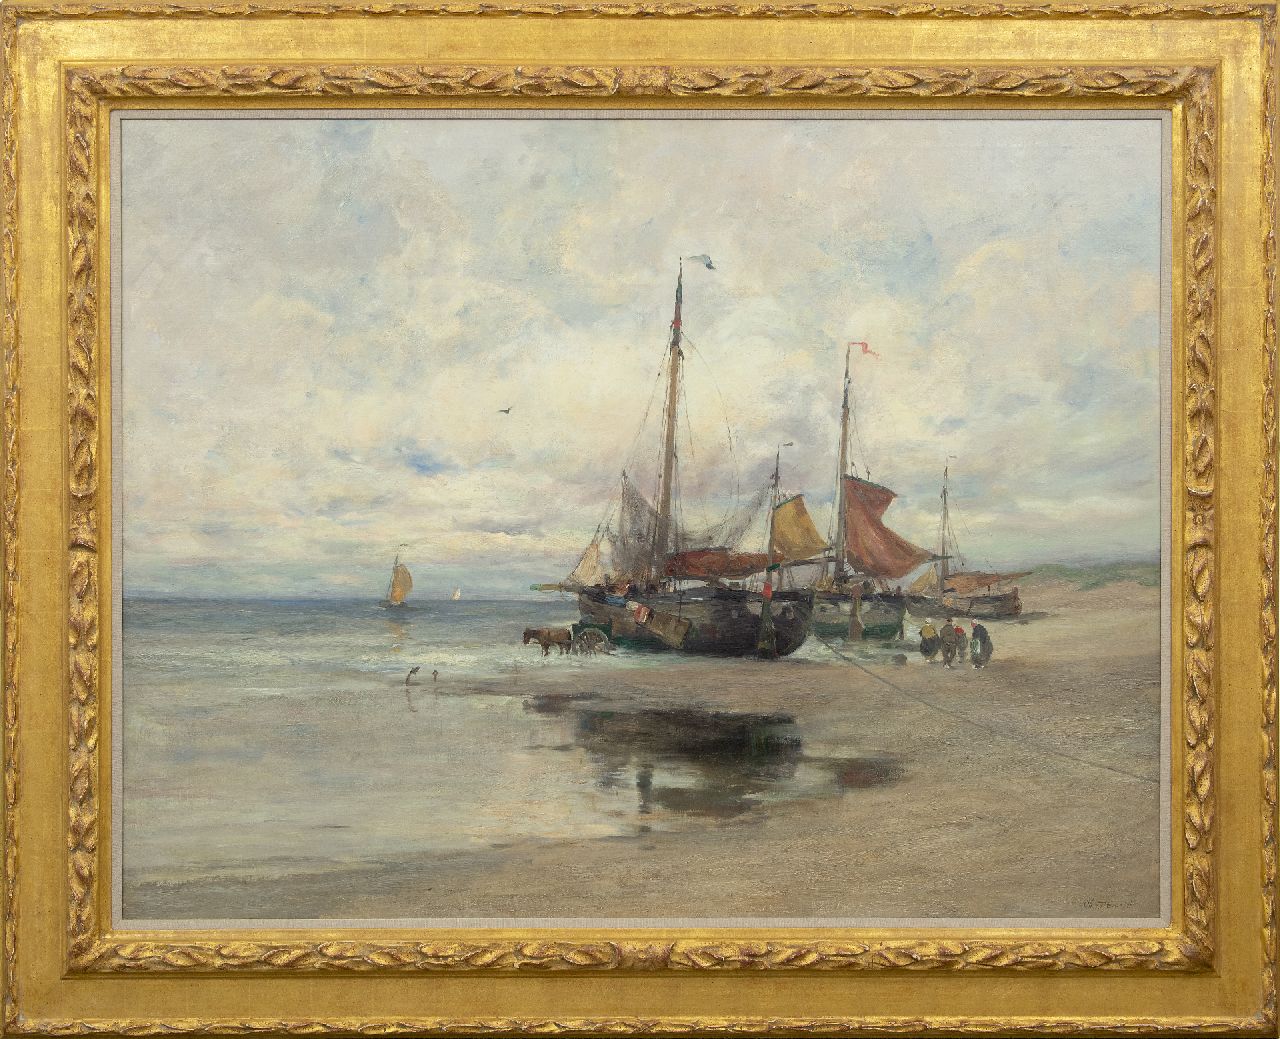 Gruppe C.P.  | Charles Paul Gruppe, Fishing boats on the beach, oil on canvas 101.7 x 131.8 cm, signed l.r. and painted ca. 1910